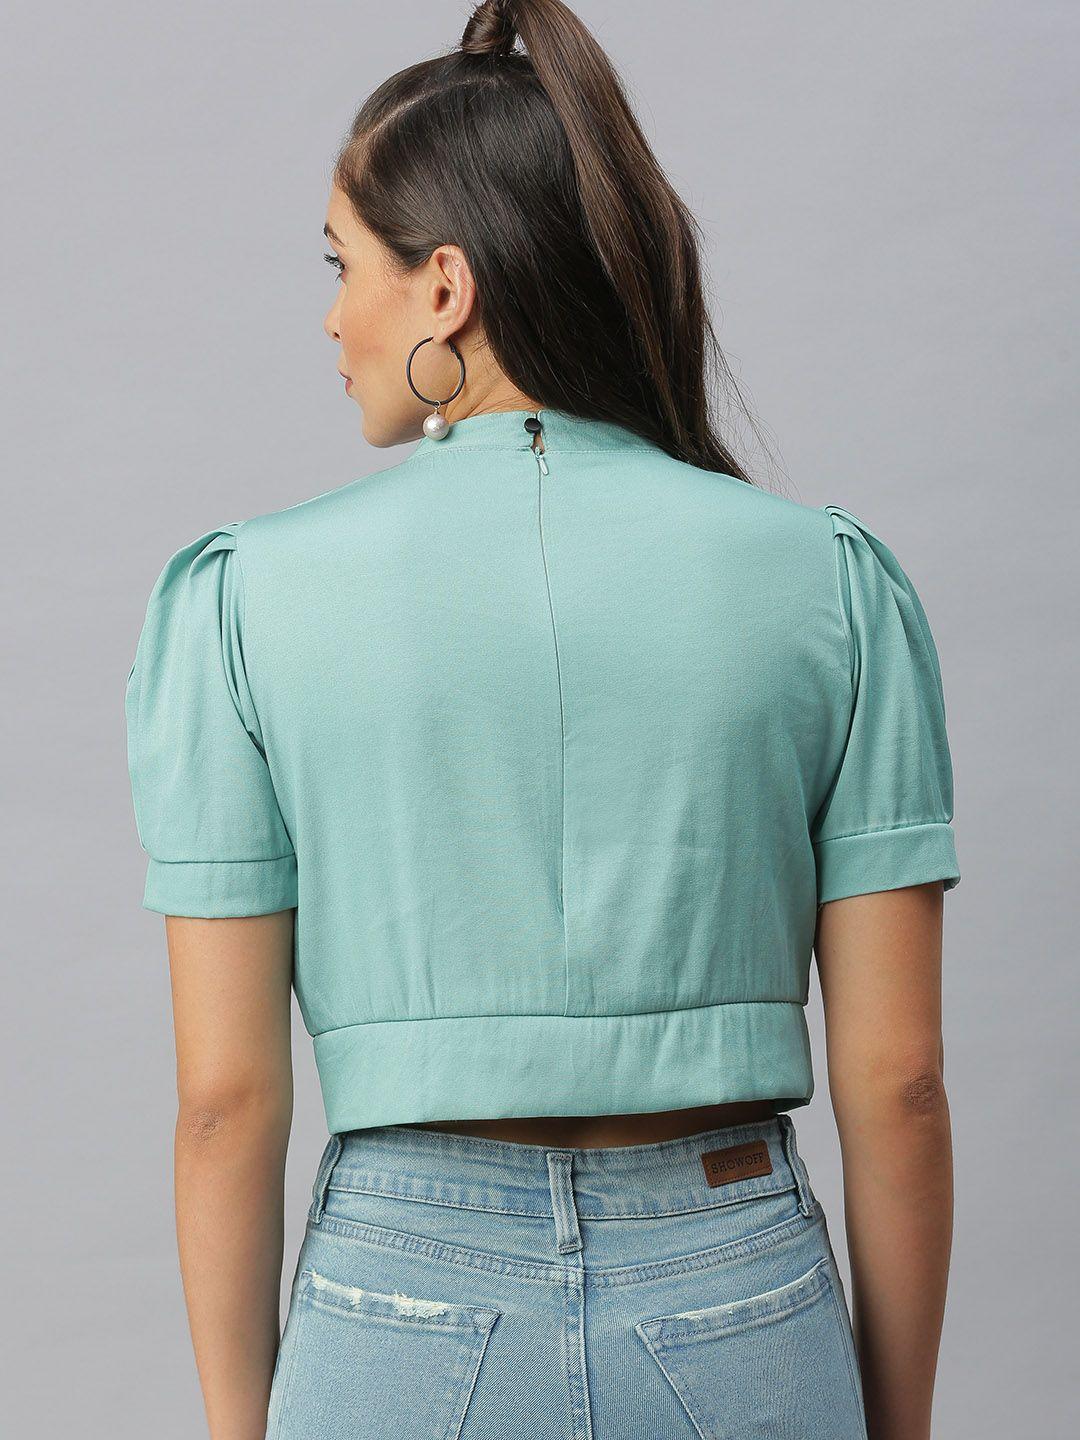 showoff sea green styled back crop top